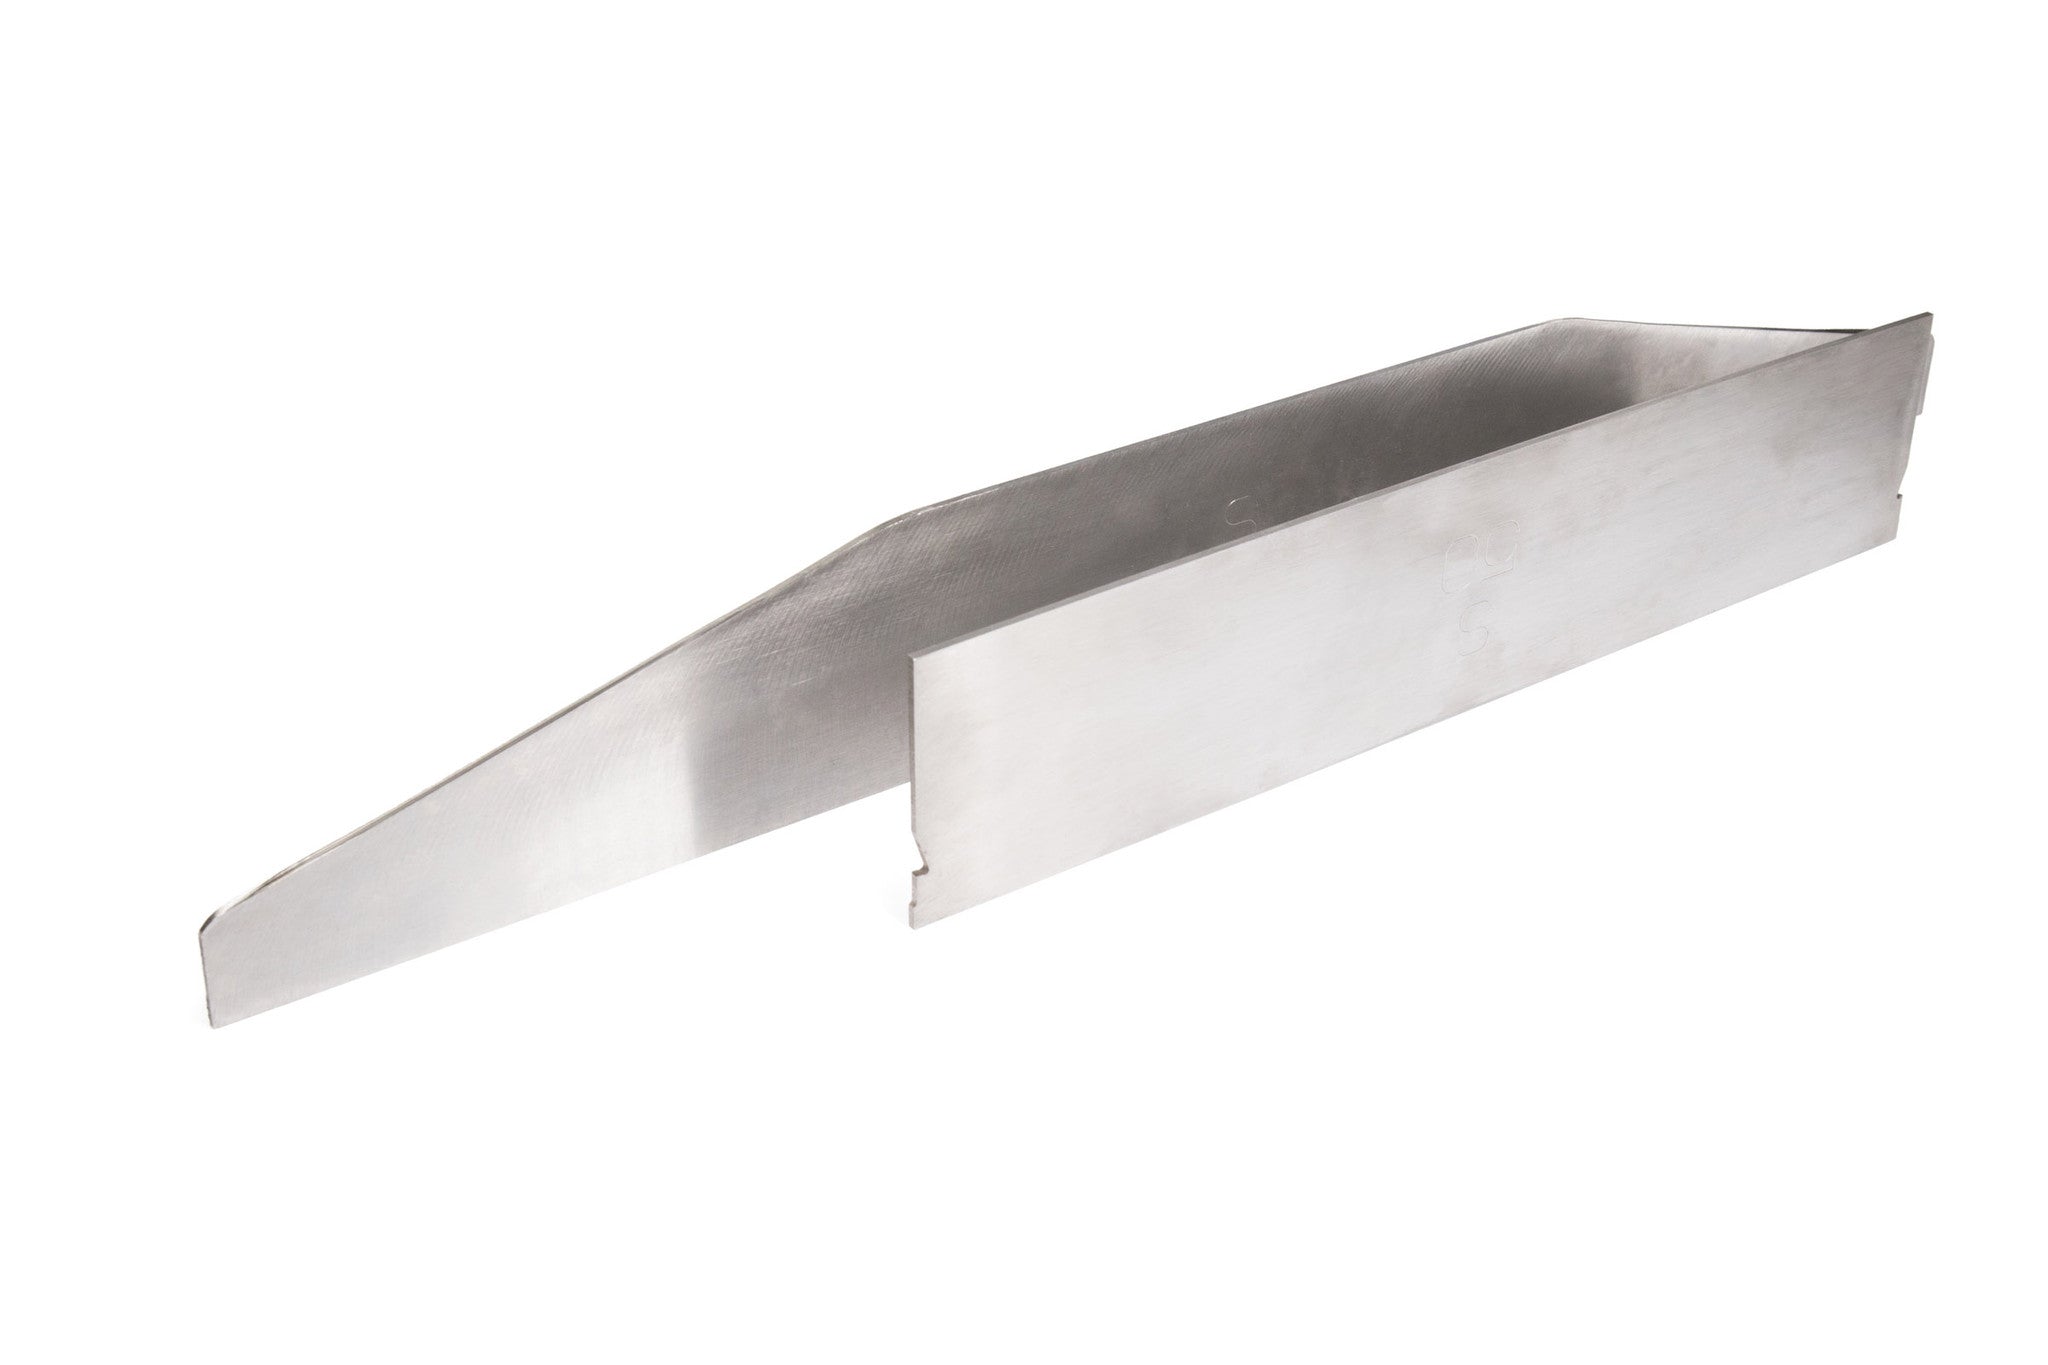 Stainless Steel Knife Edge Tool And Straight Edges, For Industrial